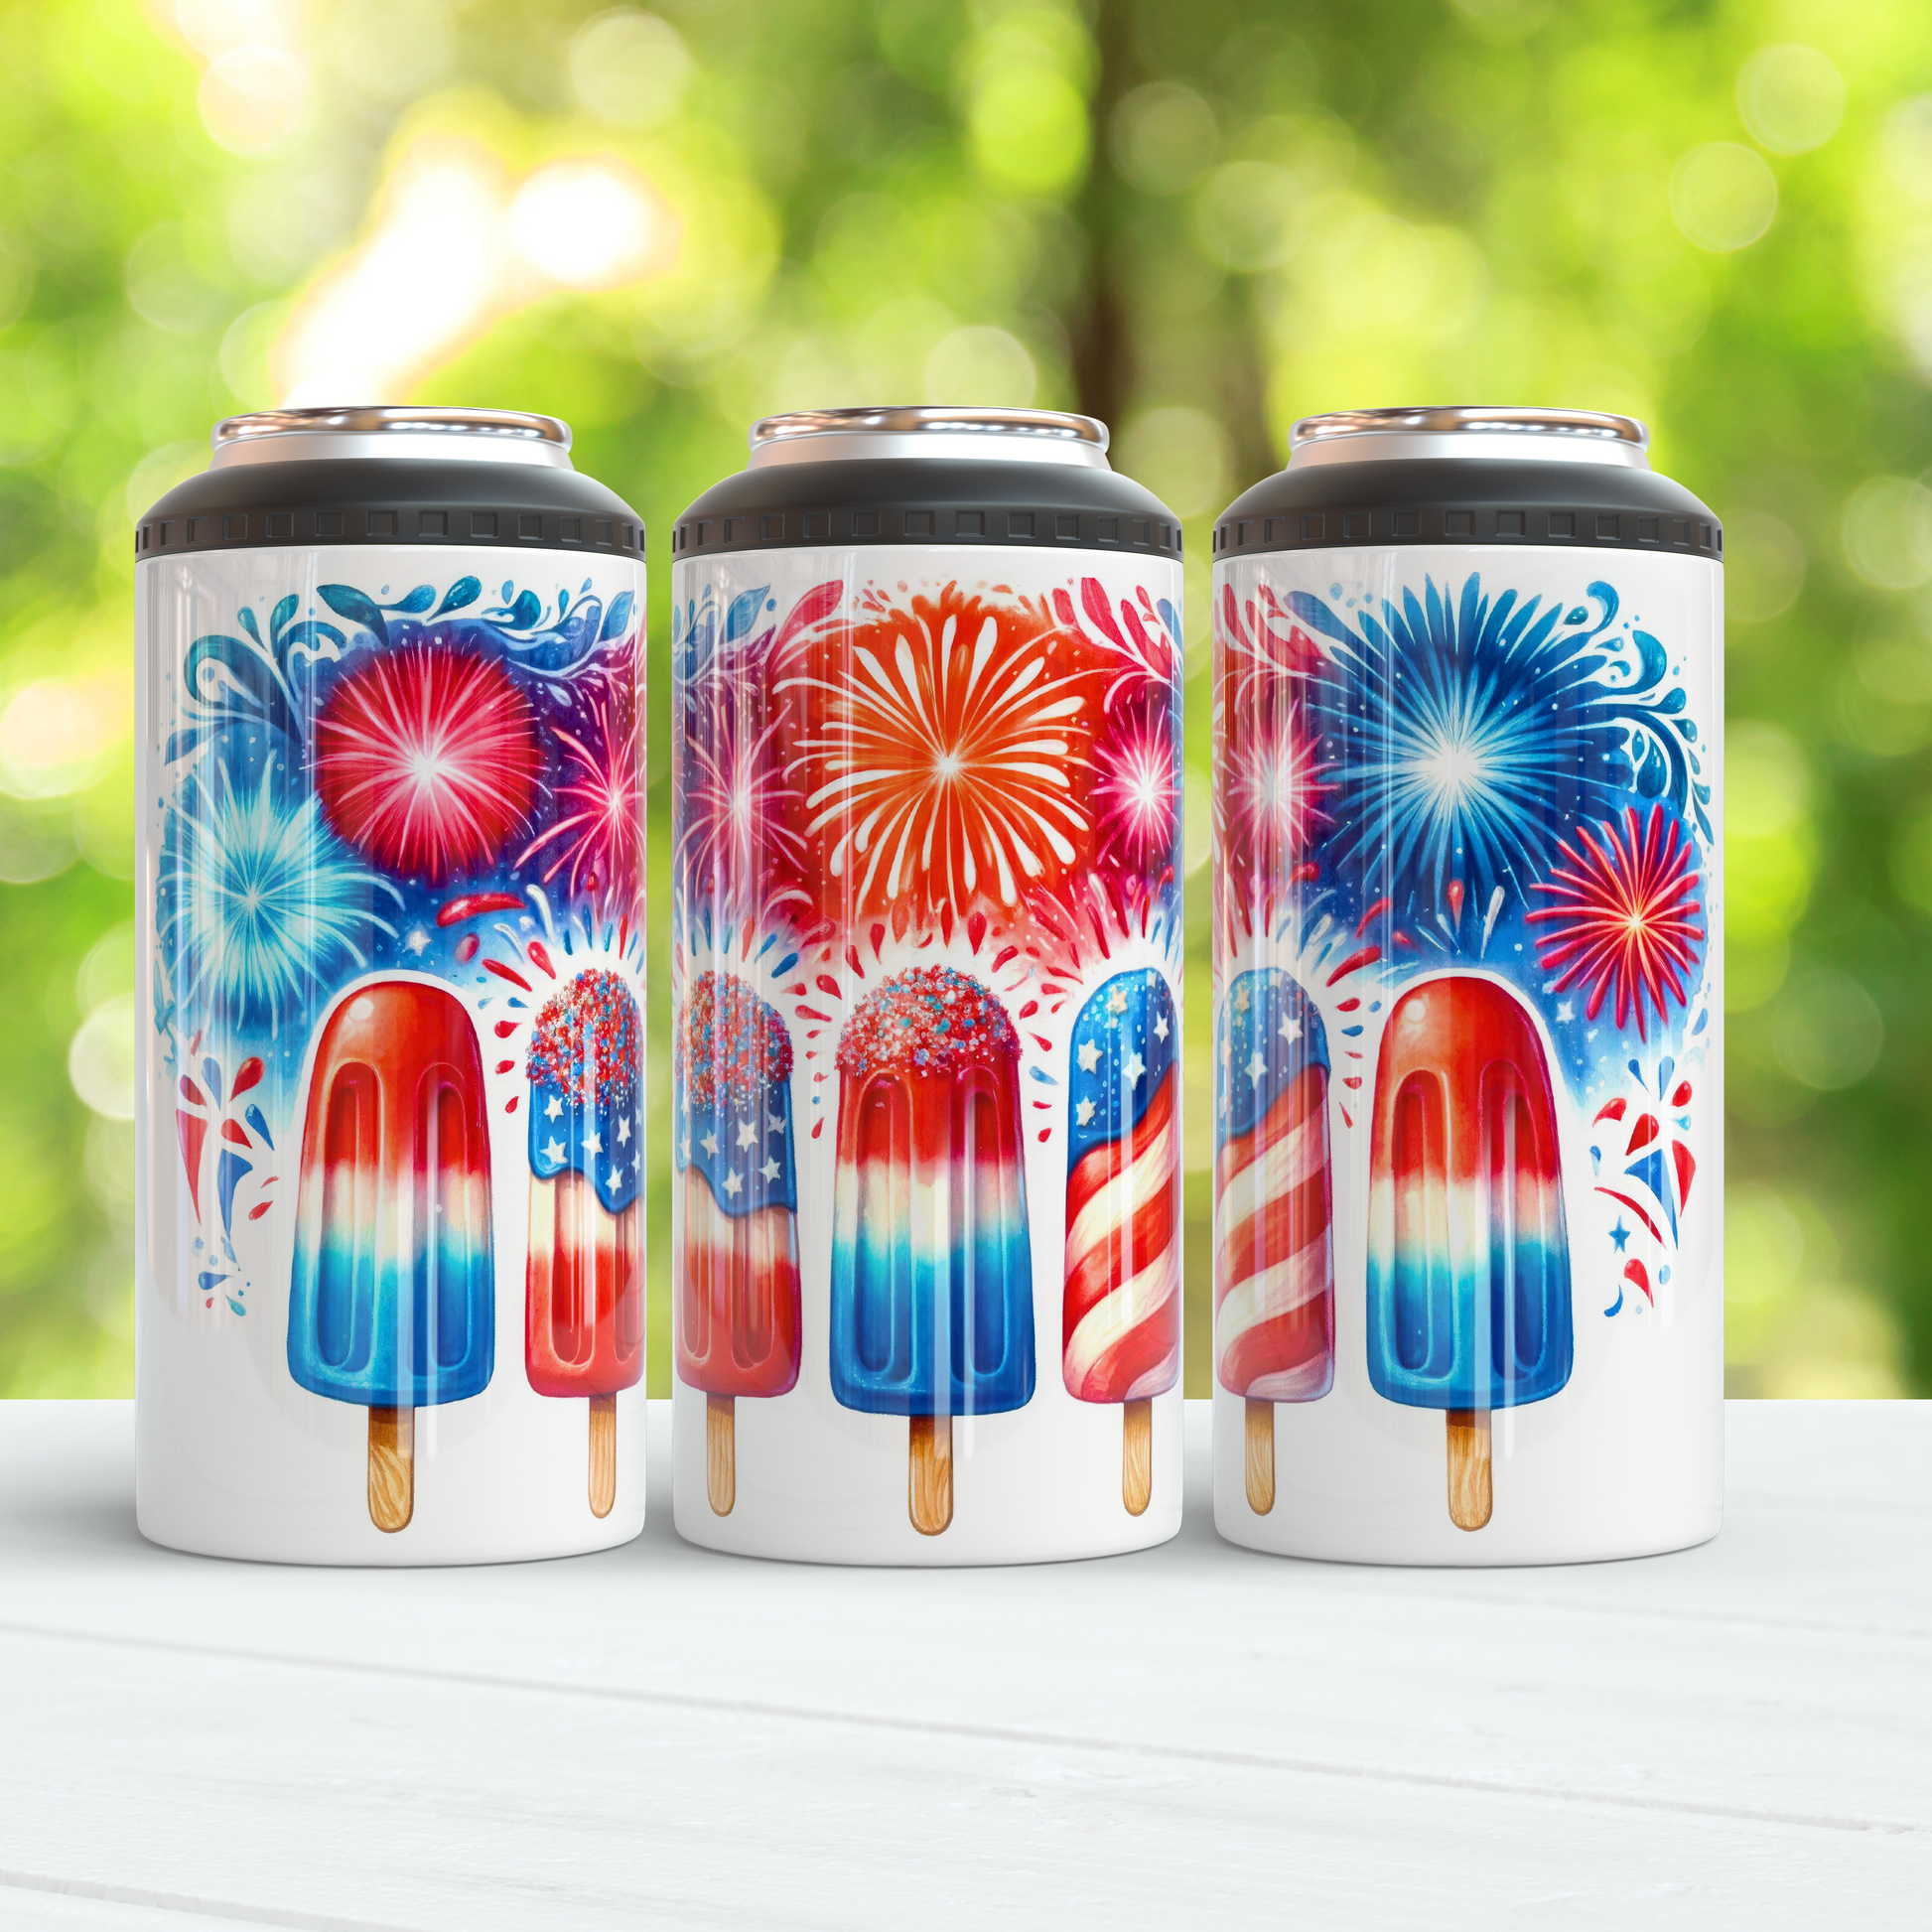 July popsicles 4-in-1 slim can cooler. -Mayan Sub Shop